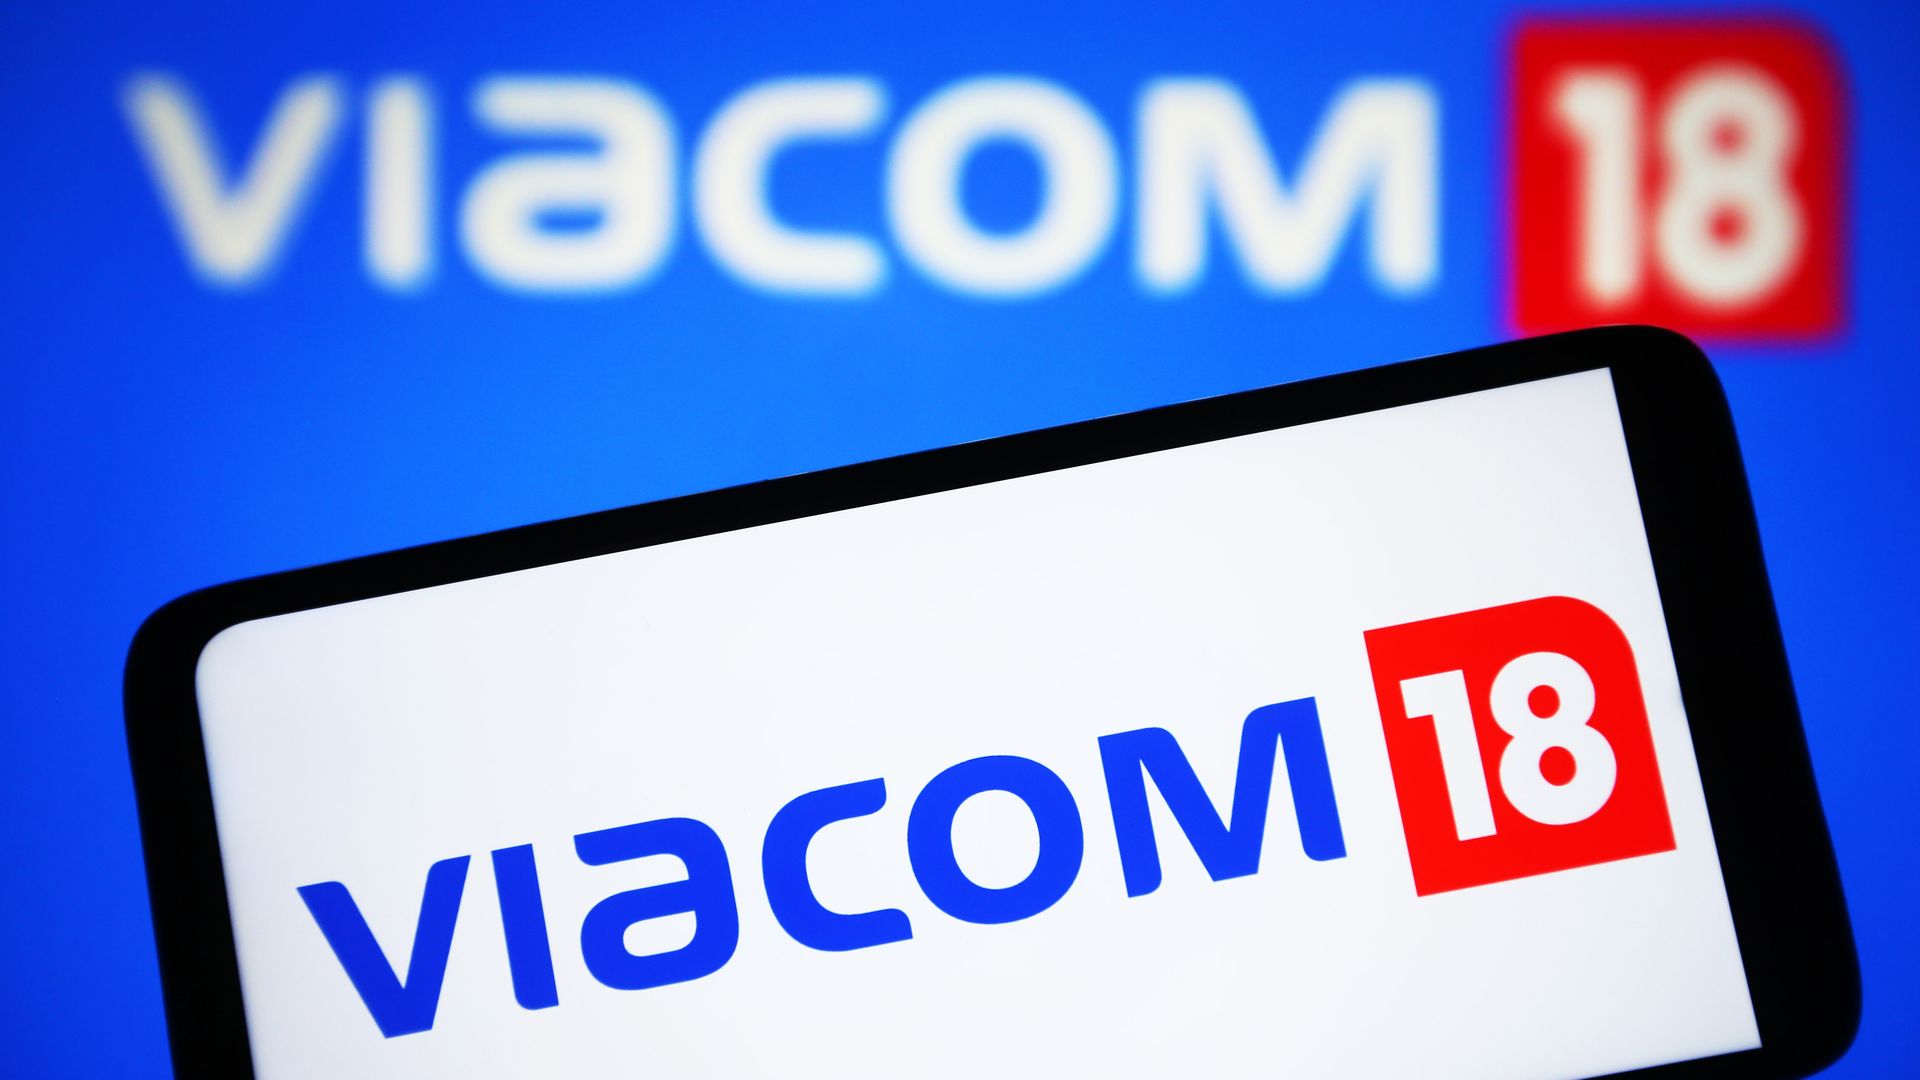 : In this photo illustration, Viacom18 Media Private Limited logo is seen on a smartphone and on a pc screen. 